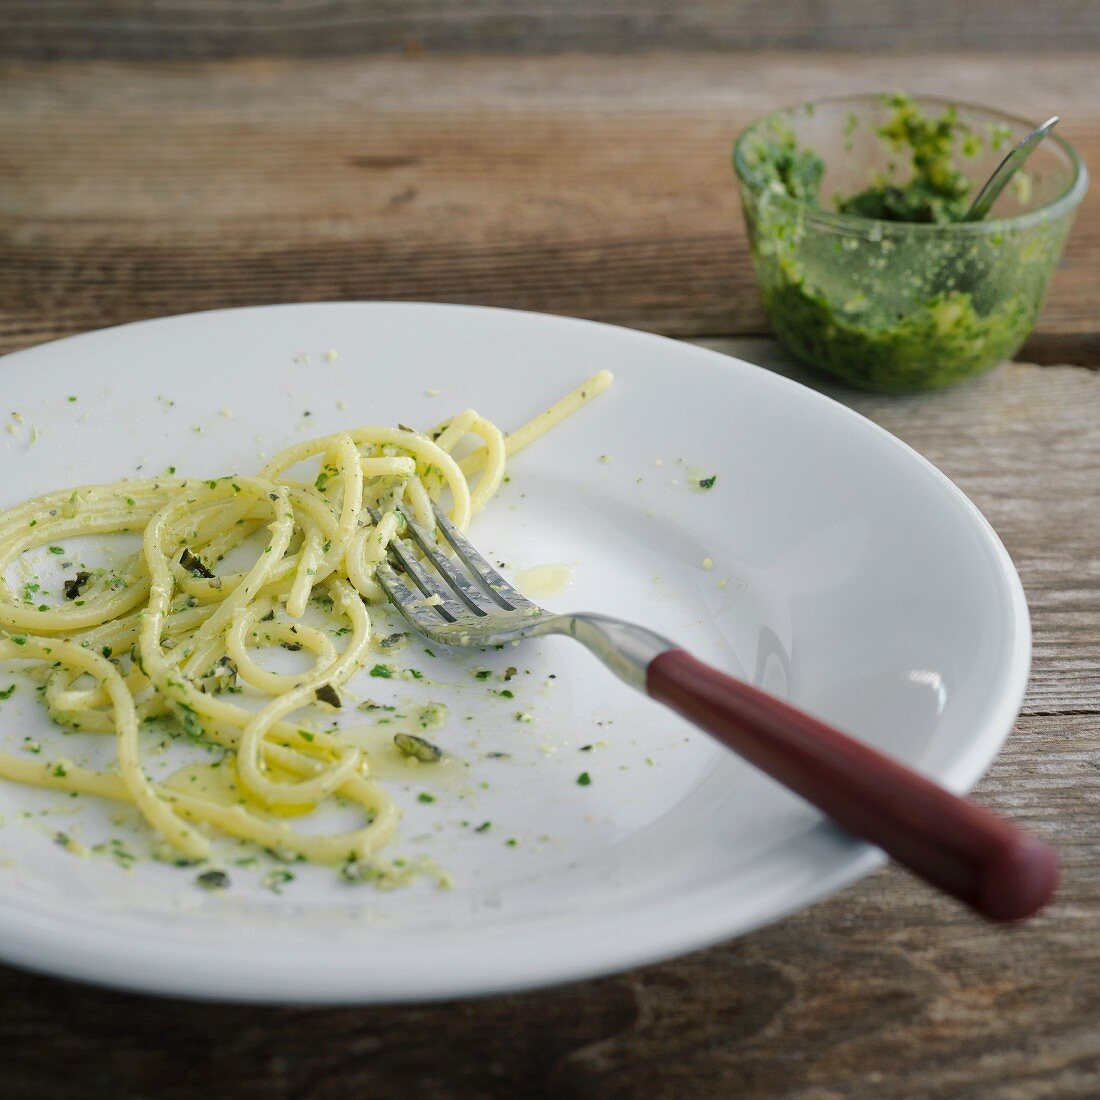 The remains of spaghetti with pumpkin seed pesto on a plate